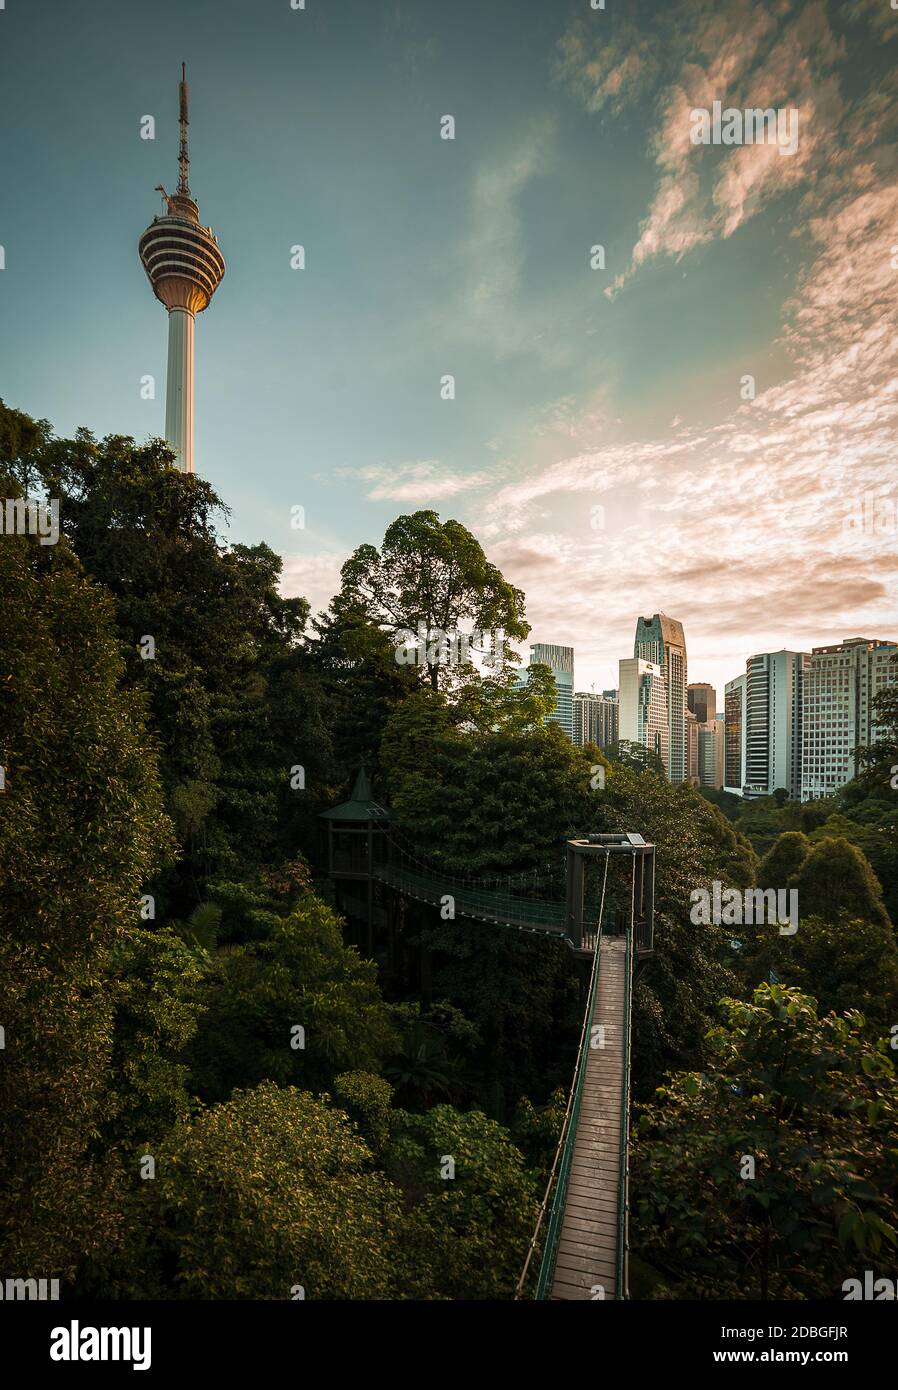 Kuala Lumpur Eco Forest Park with KL tower view Stock Photo